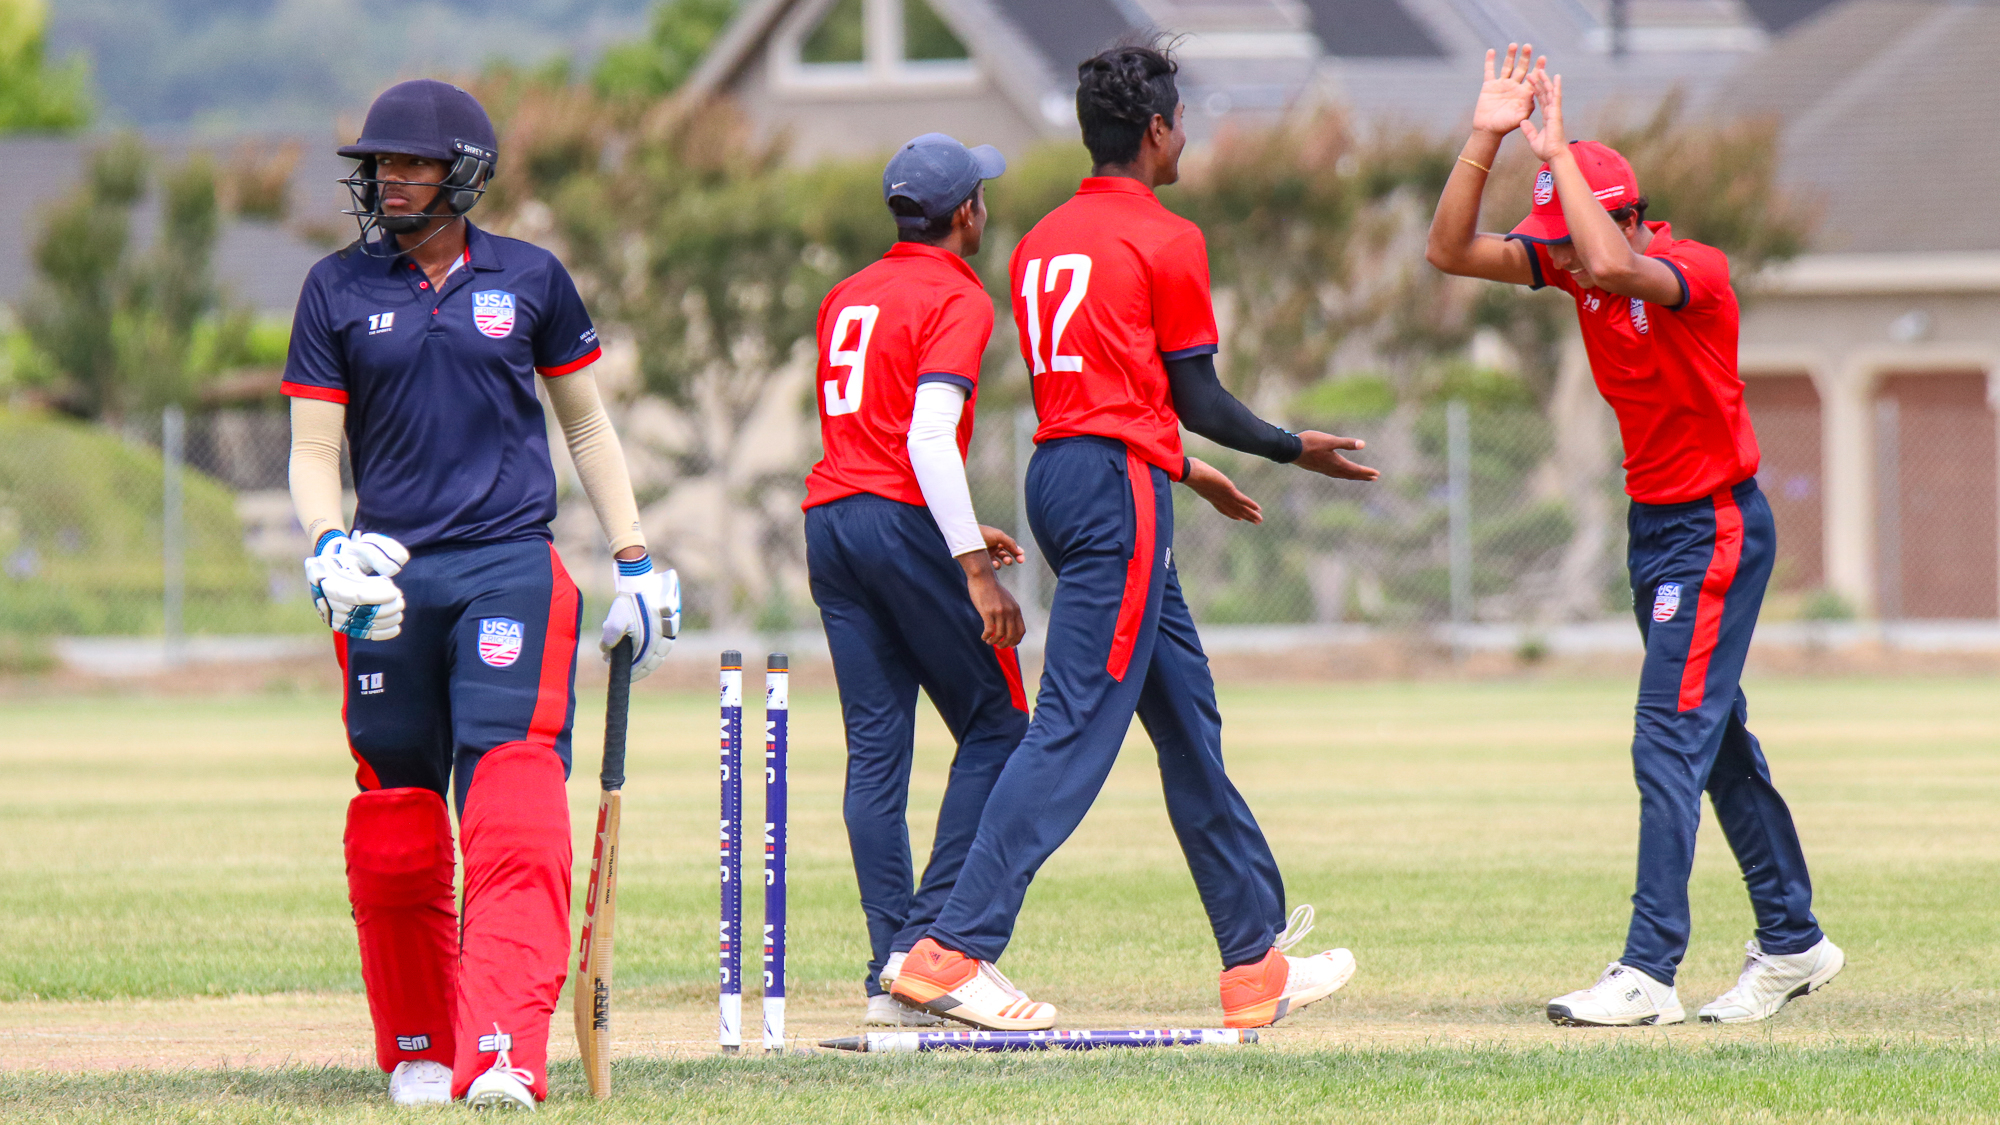 Under 19 Training and Selection Camp – Reds vs Blues 50 Overs Game